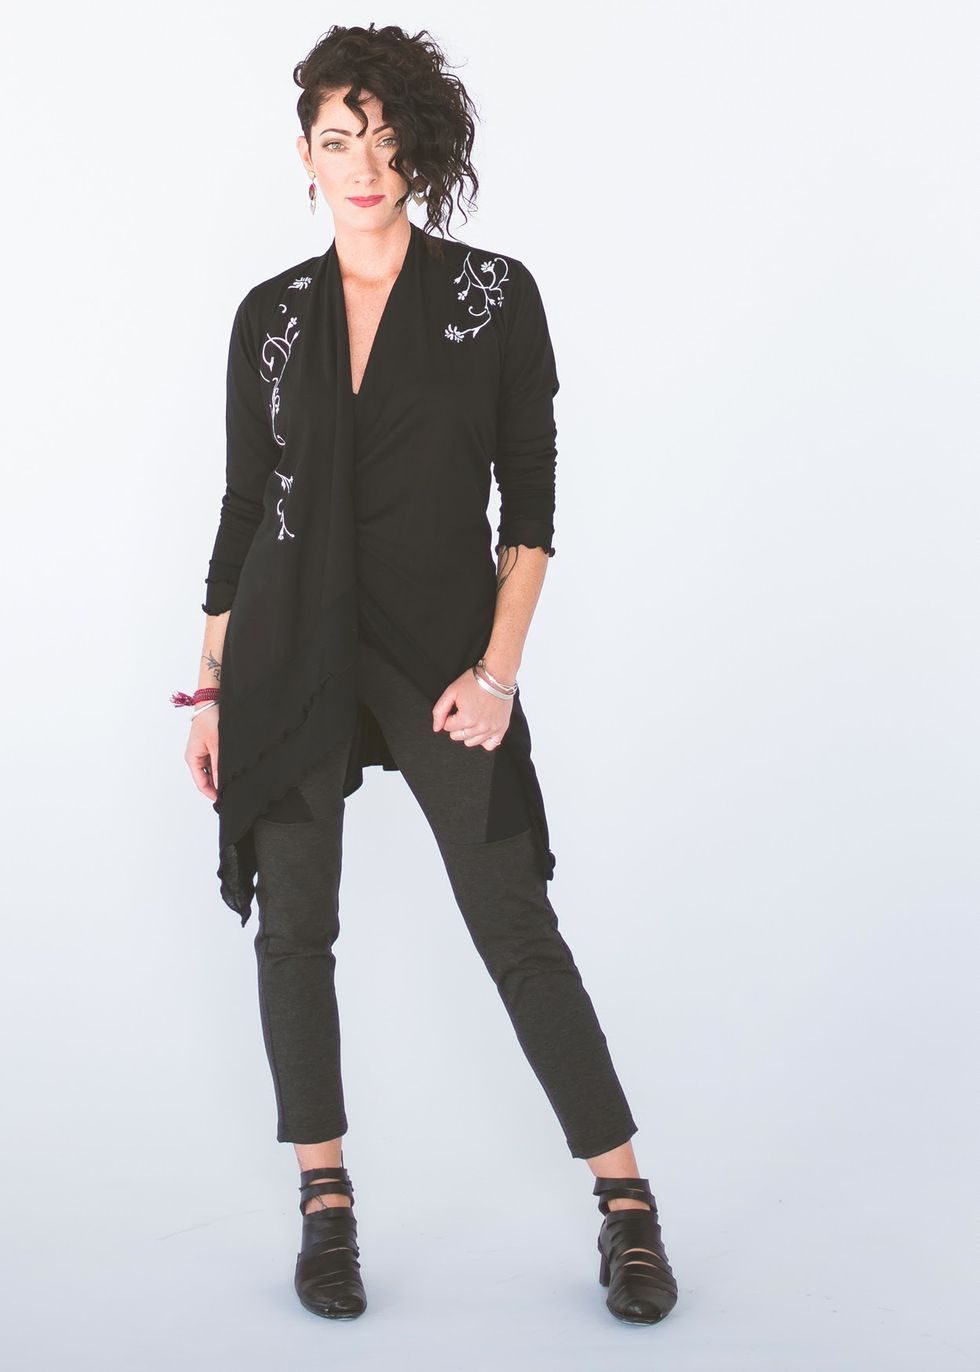 dandeneau wears her bamboo cardigan in black with a heritage design called catherine’s vine